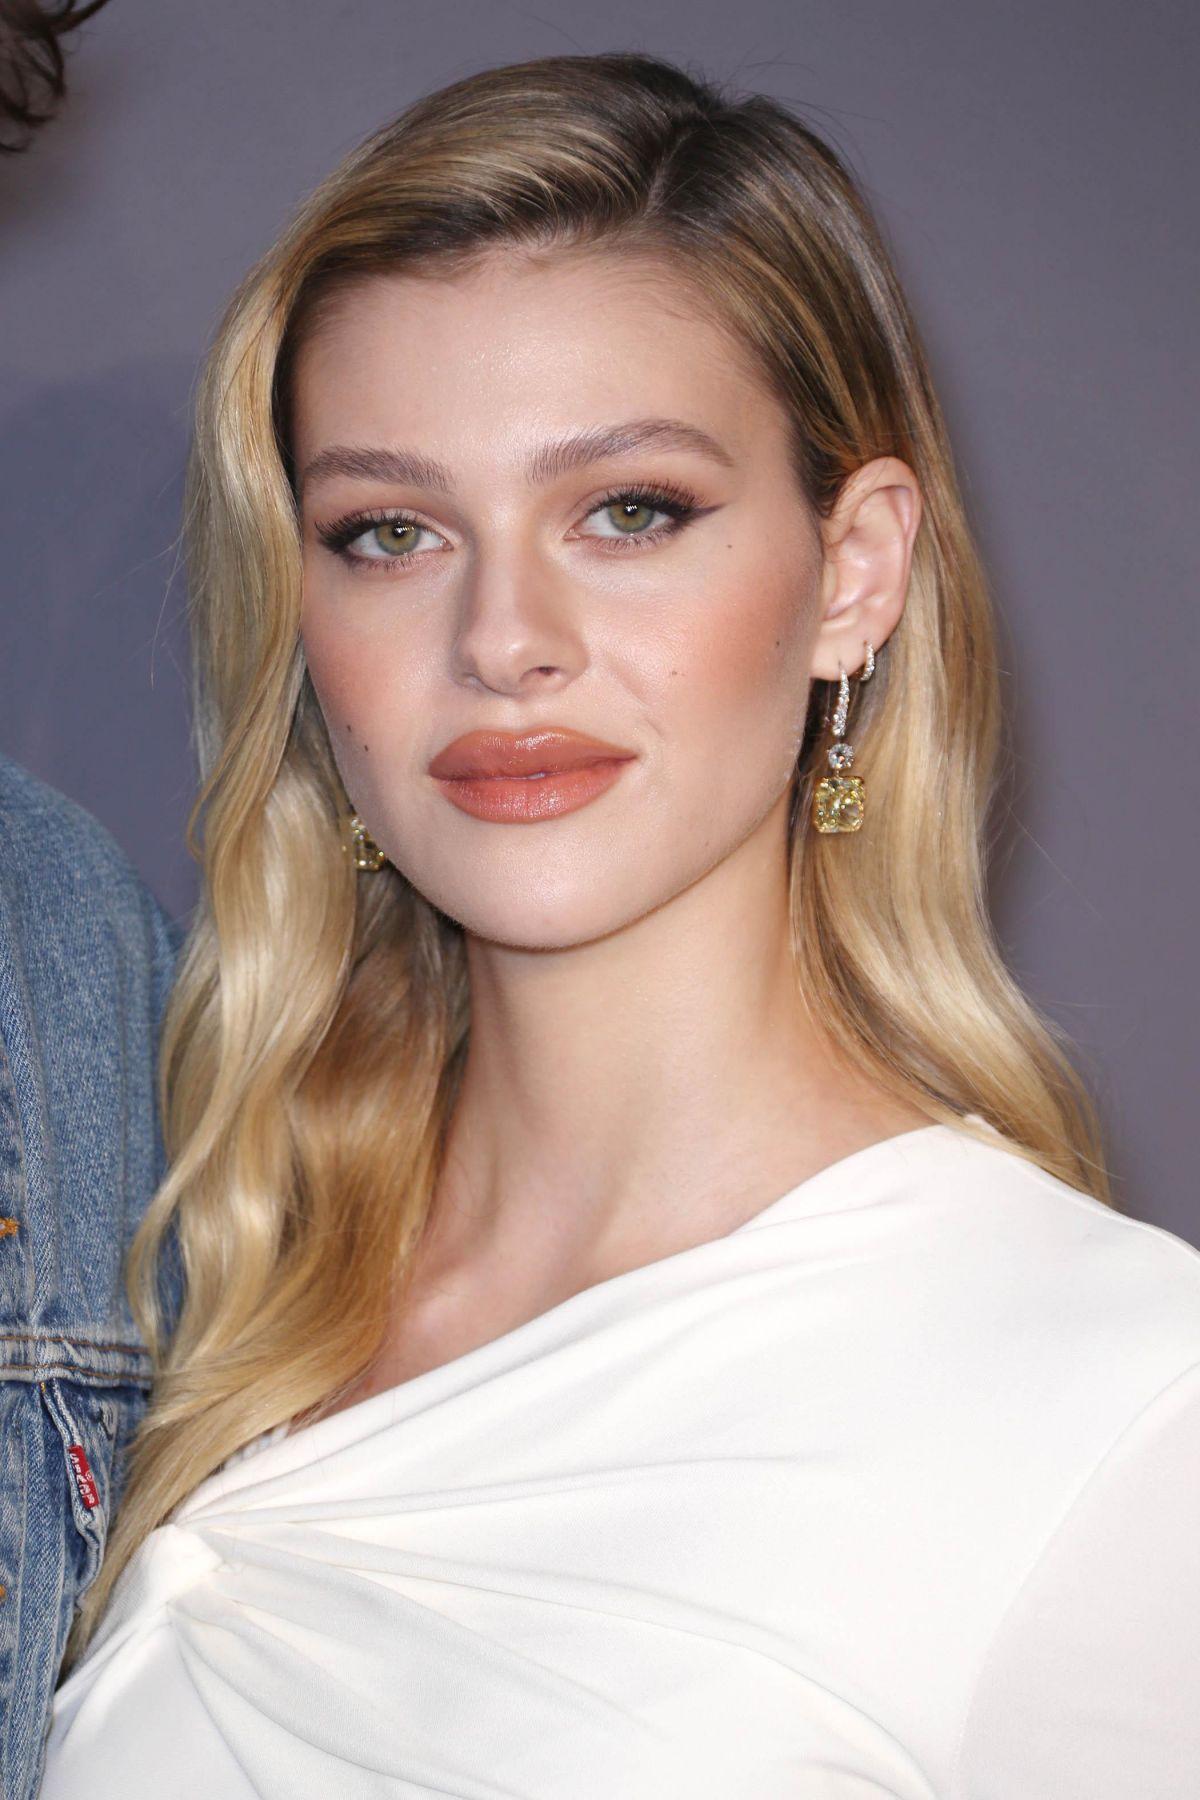 55 Hot Pictures Of Nicola Peltz Will Drive You Insane For Her 224